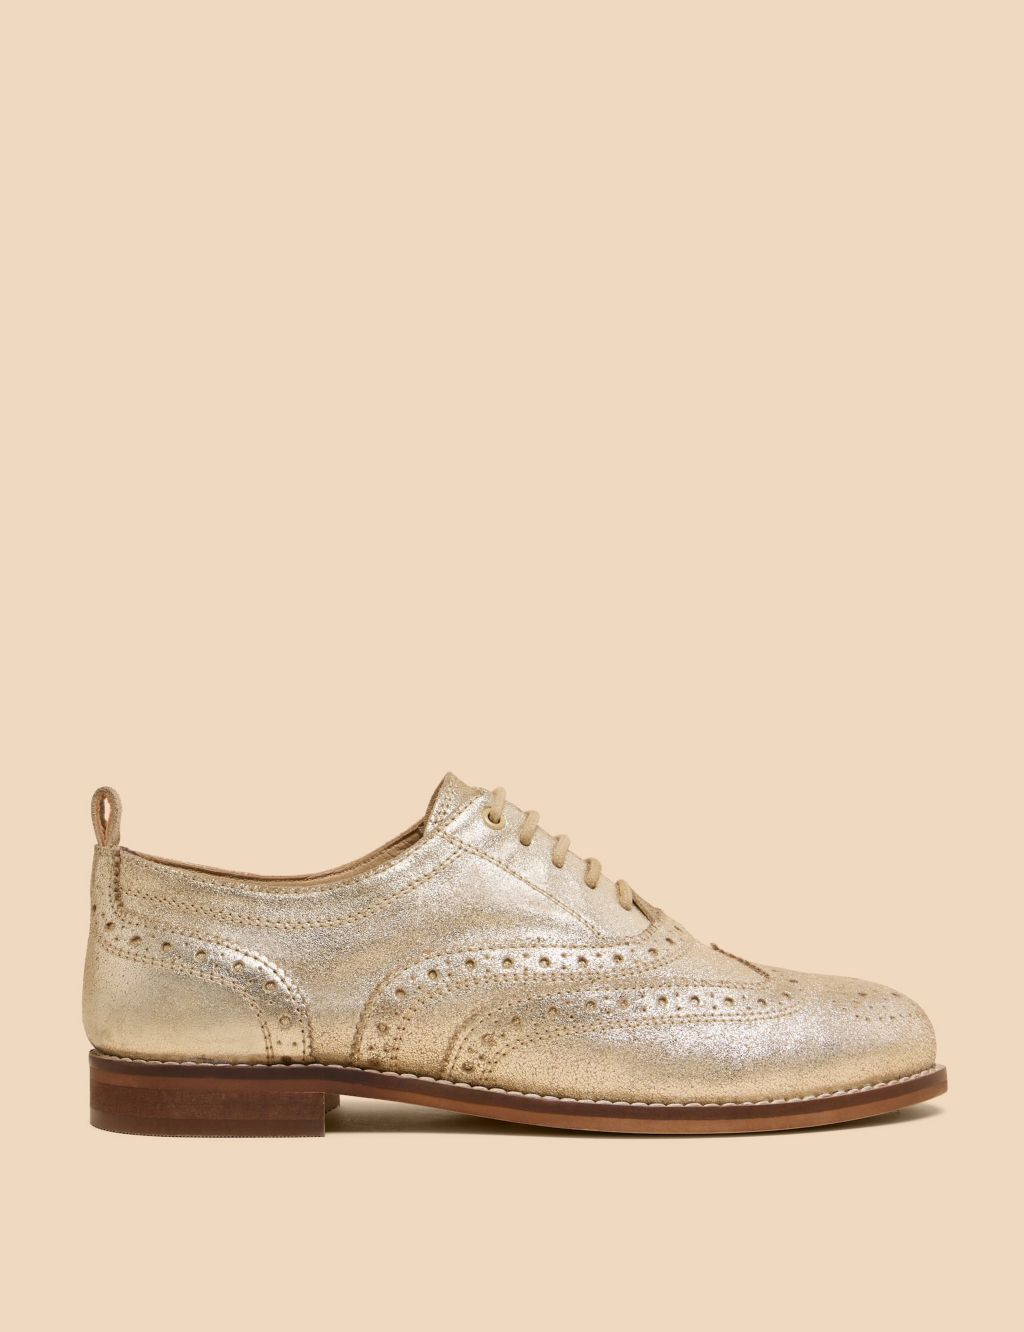 Leather Lace Up Flat Brogues